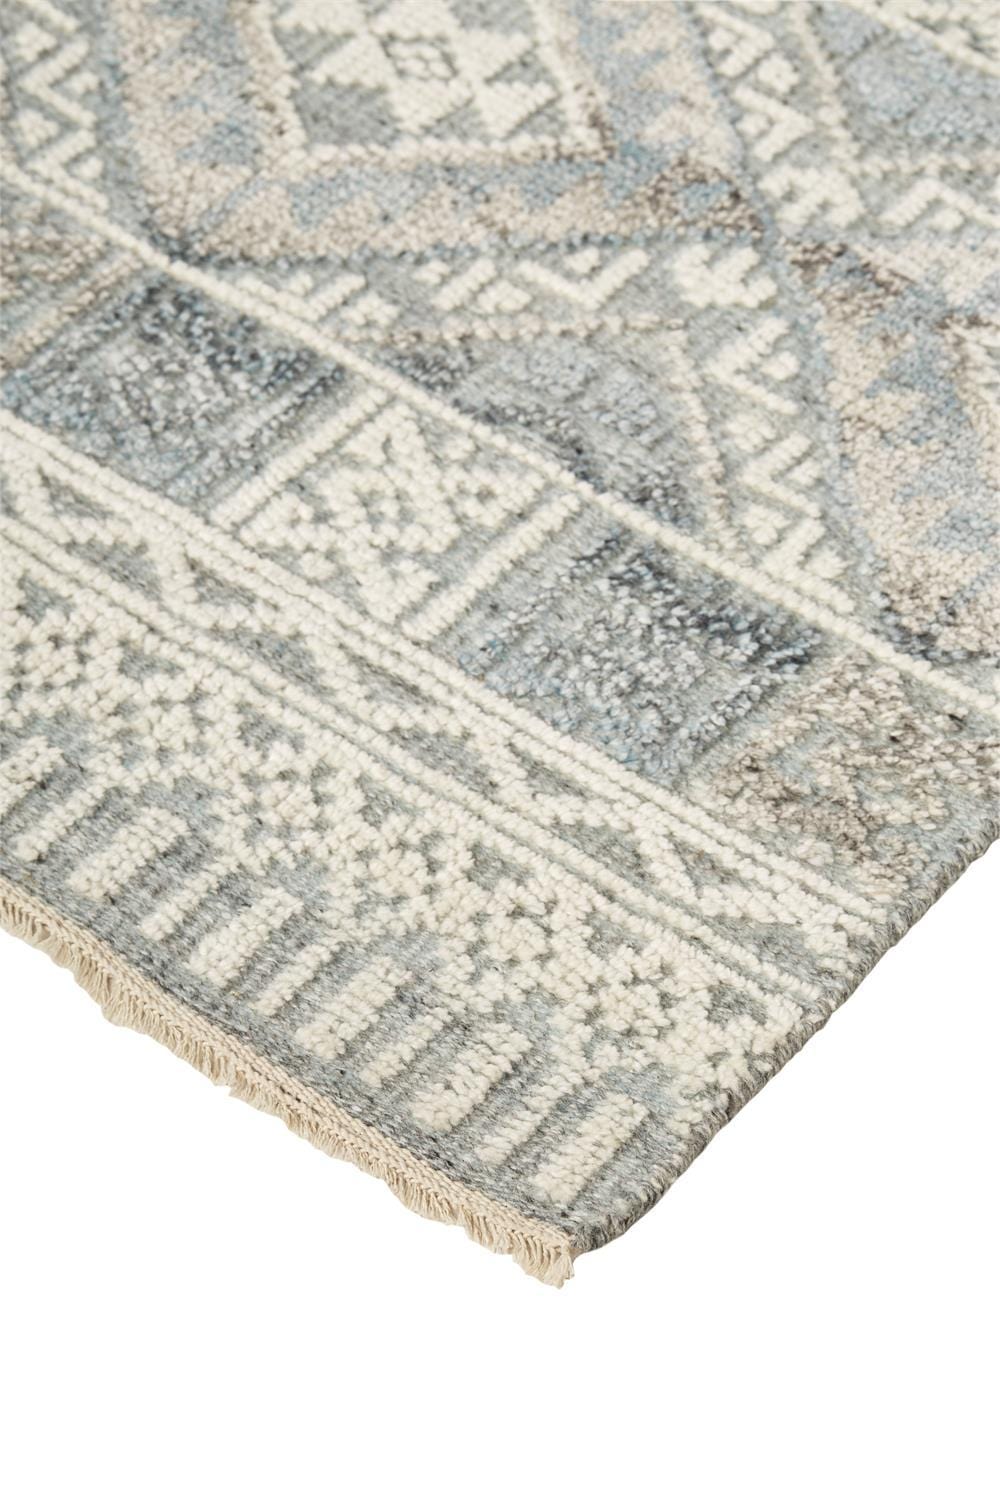 Feizy Payton Geometric Tribal Rug - Aqua Blue & Gray - Available in 9 Sizes